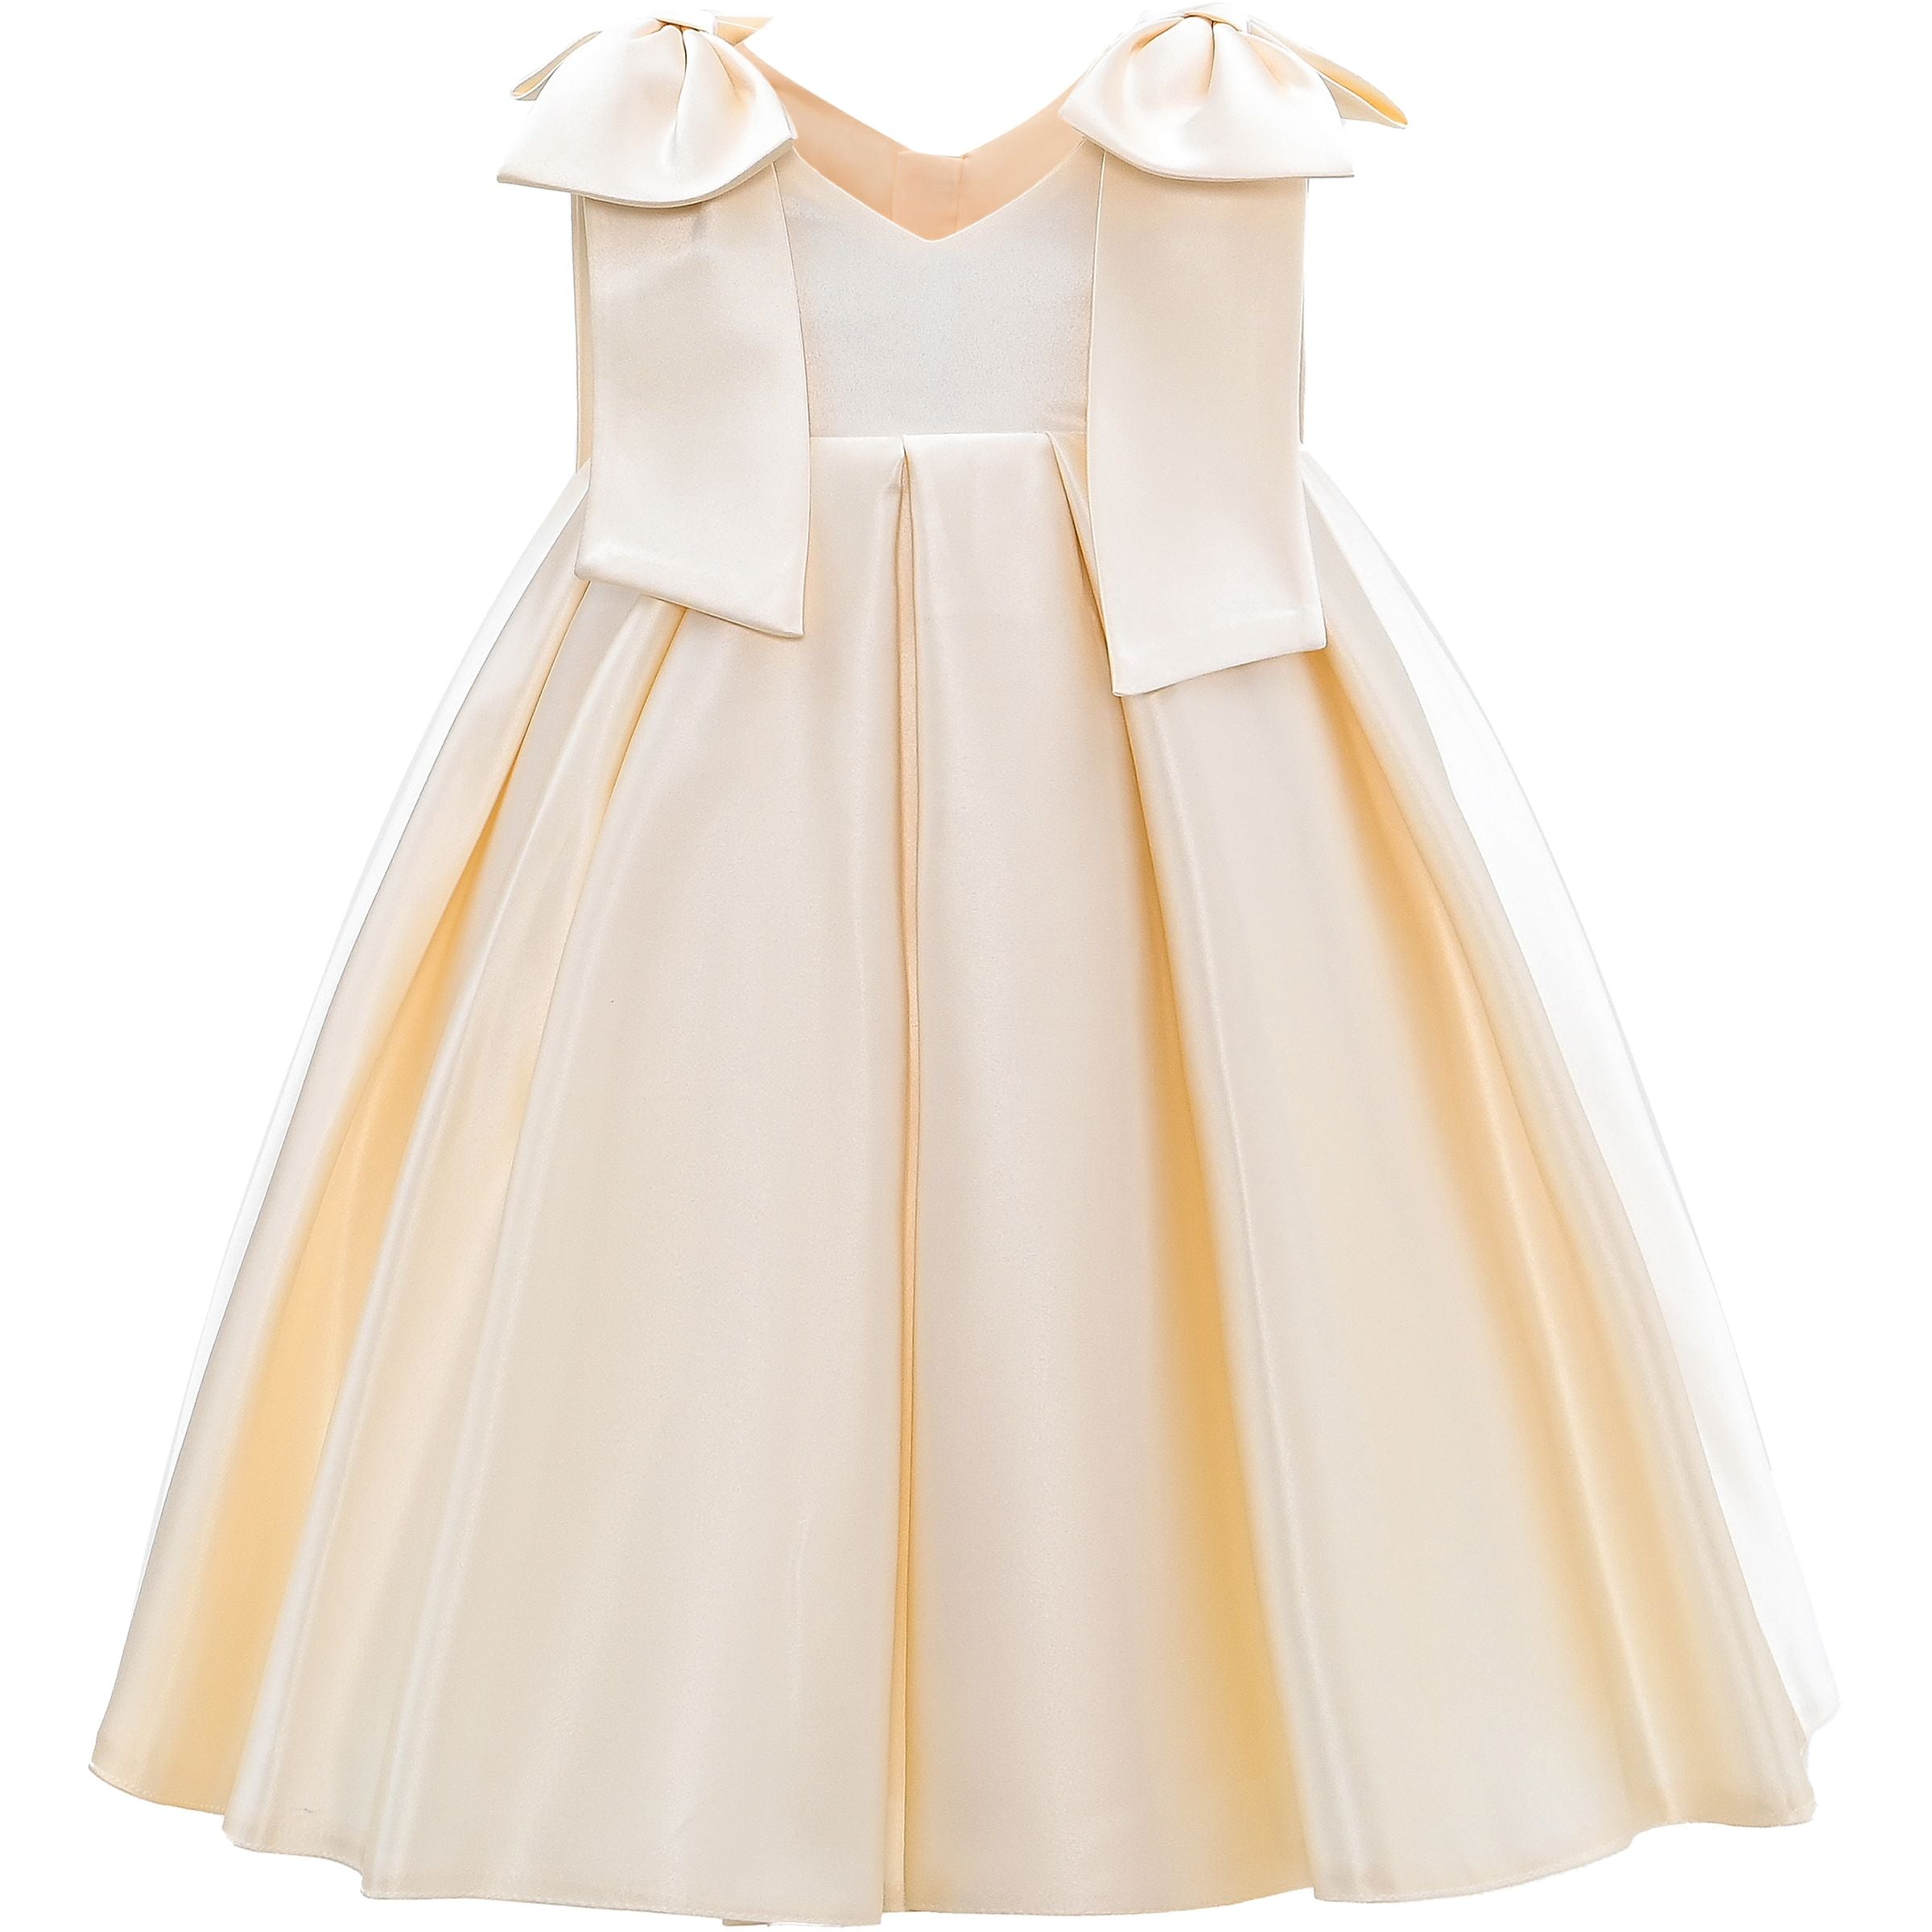 kids-atelier-tulleen-kid-girl-champagne-gold-palermo-satin-bow-pleated-dress-t9901-champagne